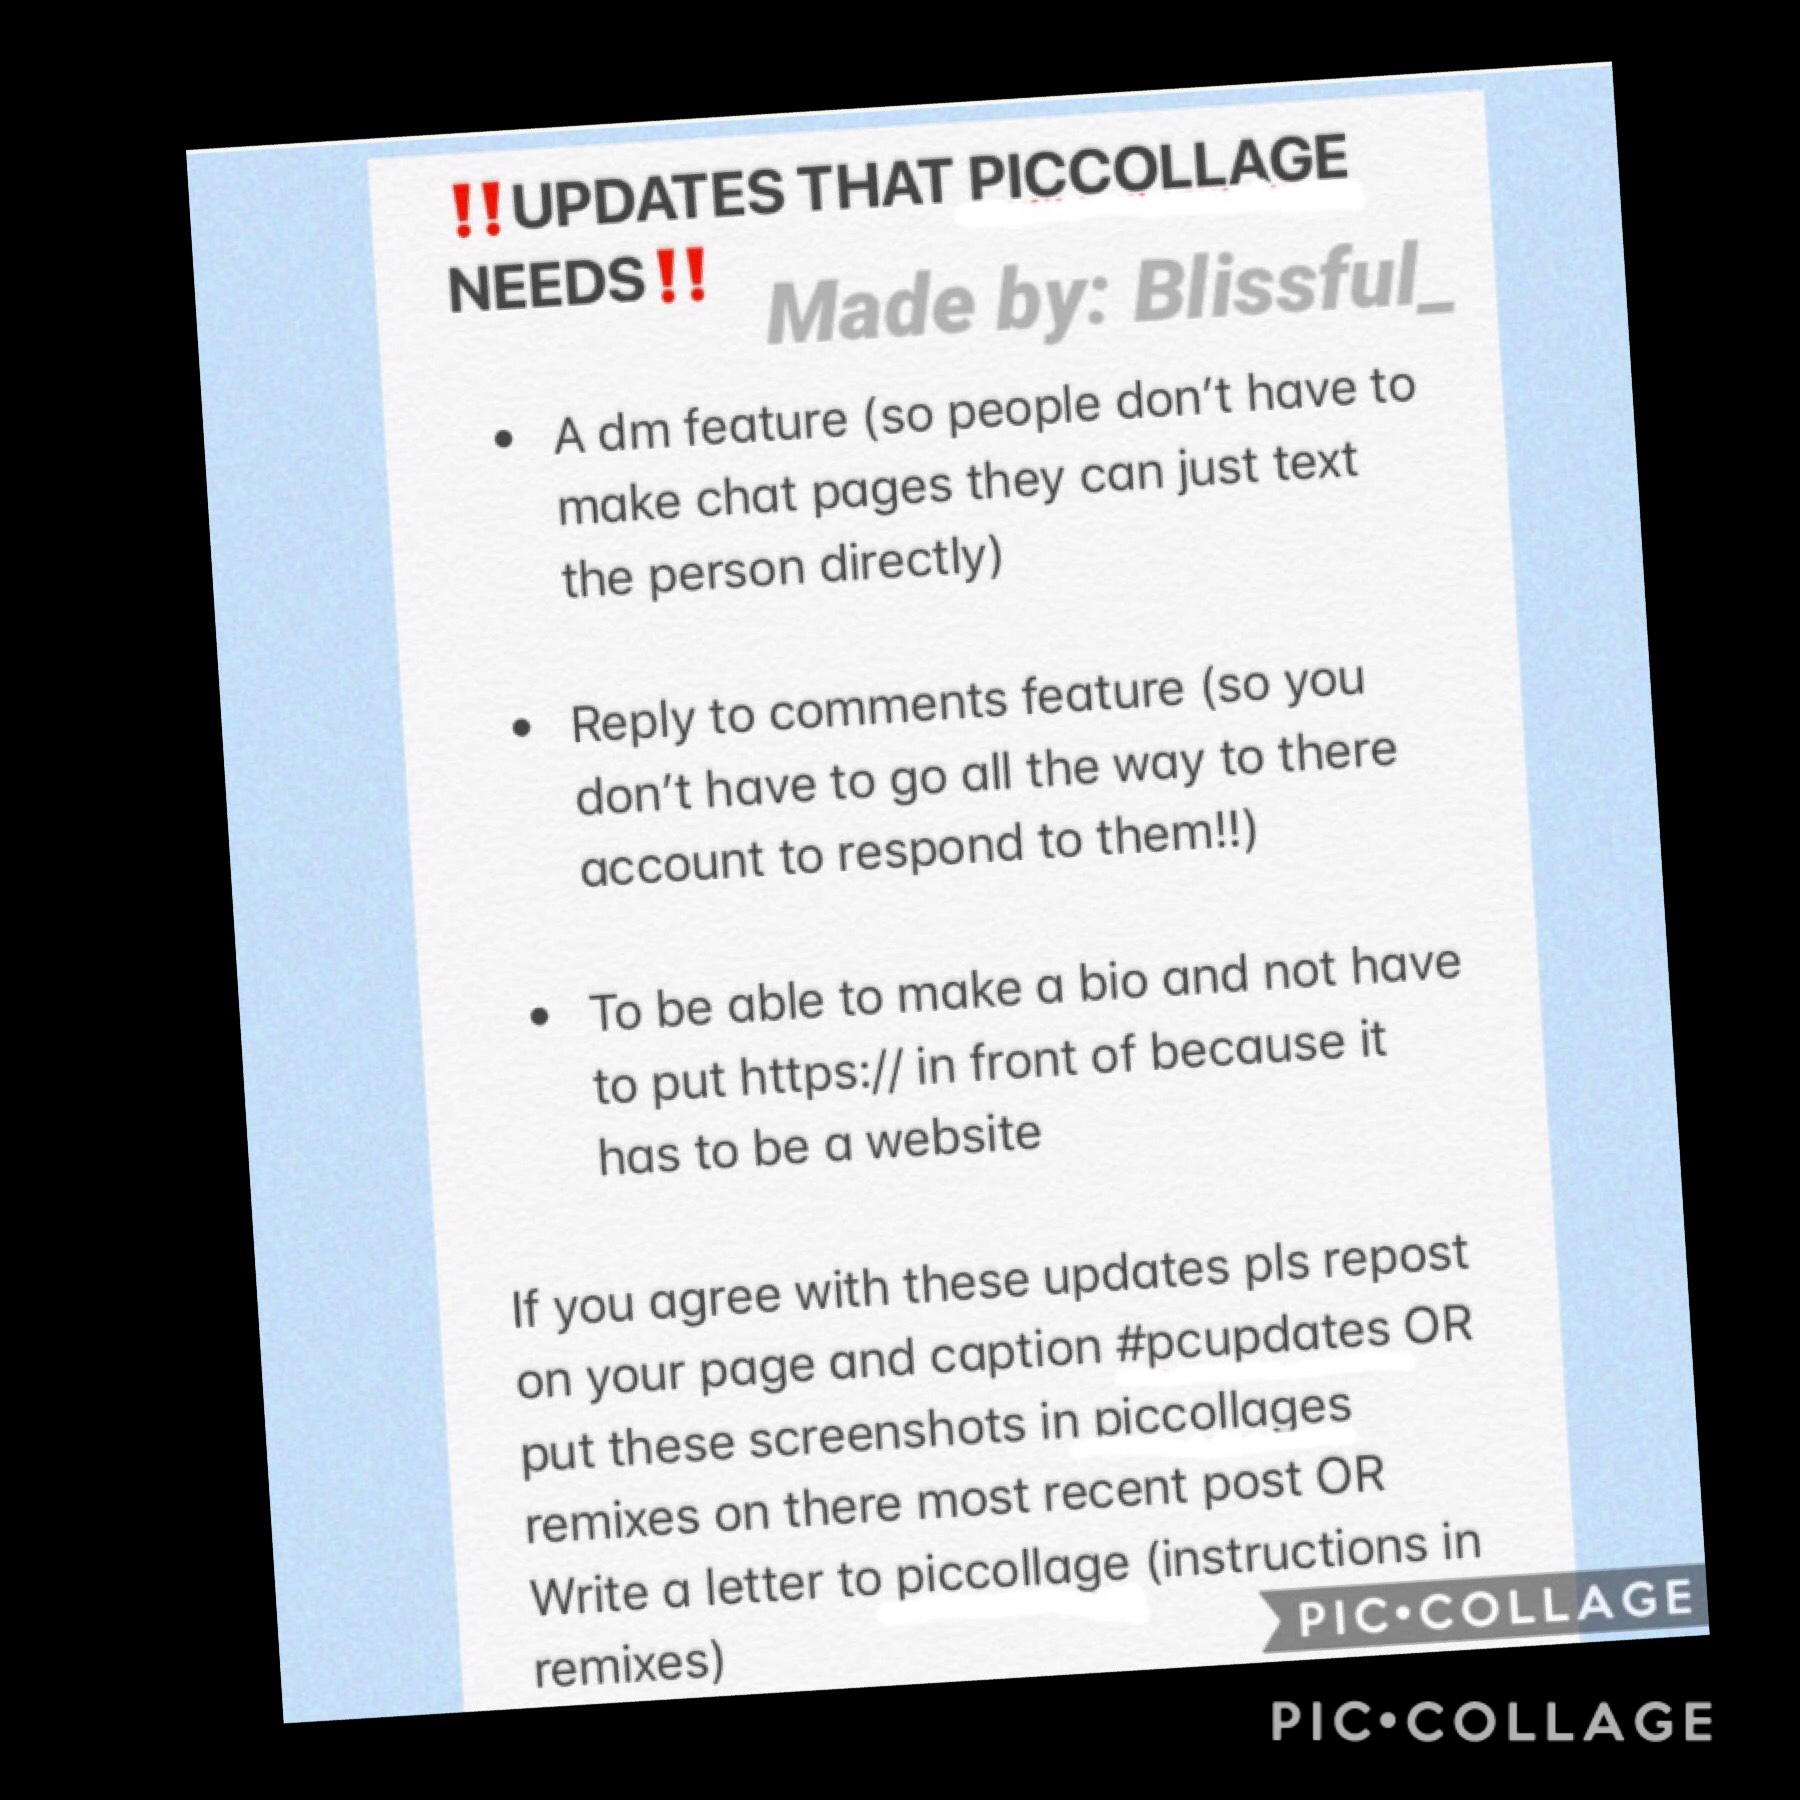 Piccollage needs these updates so pls share and follow the person who made this @Blissful_